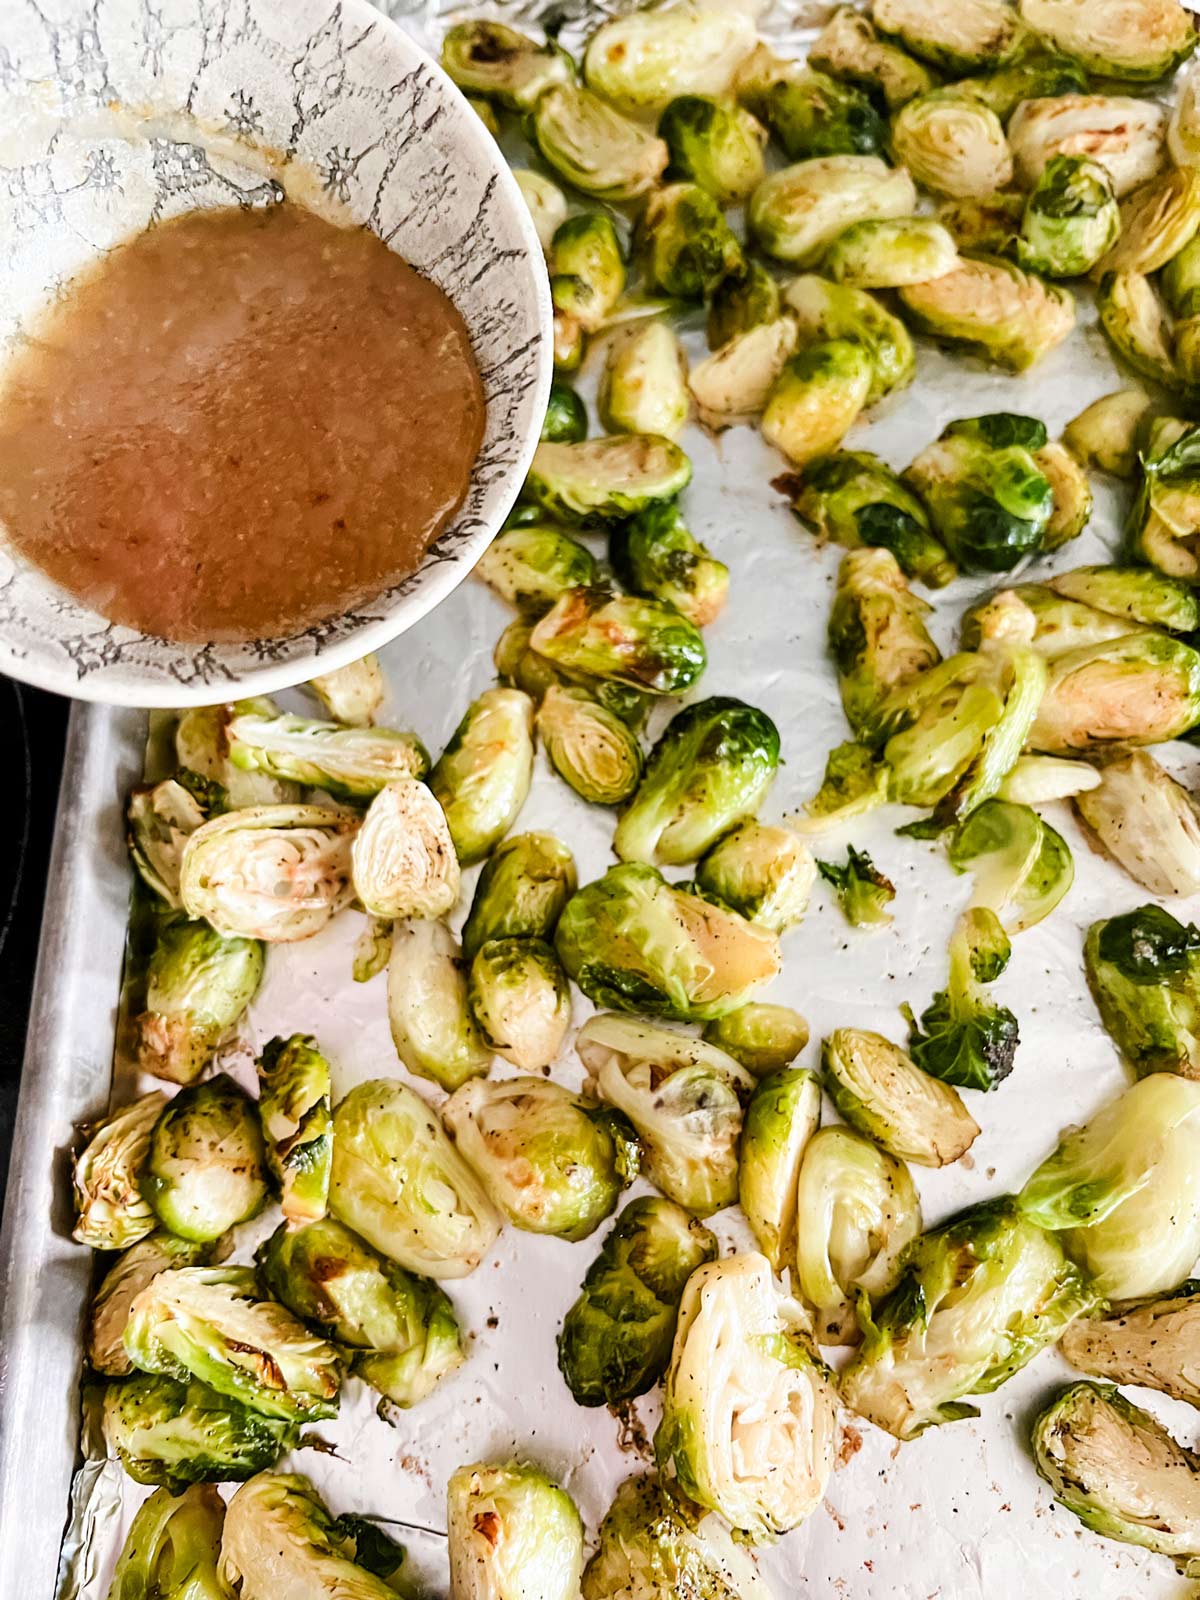 A maple glazede being poured over partially roasted Brussels sprouts.